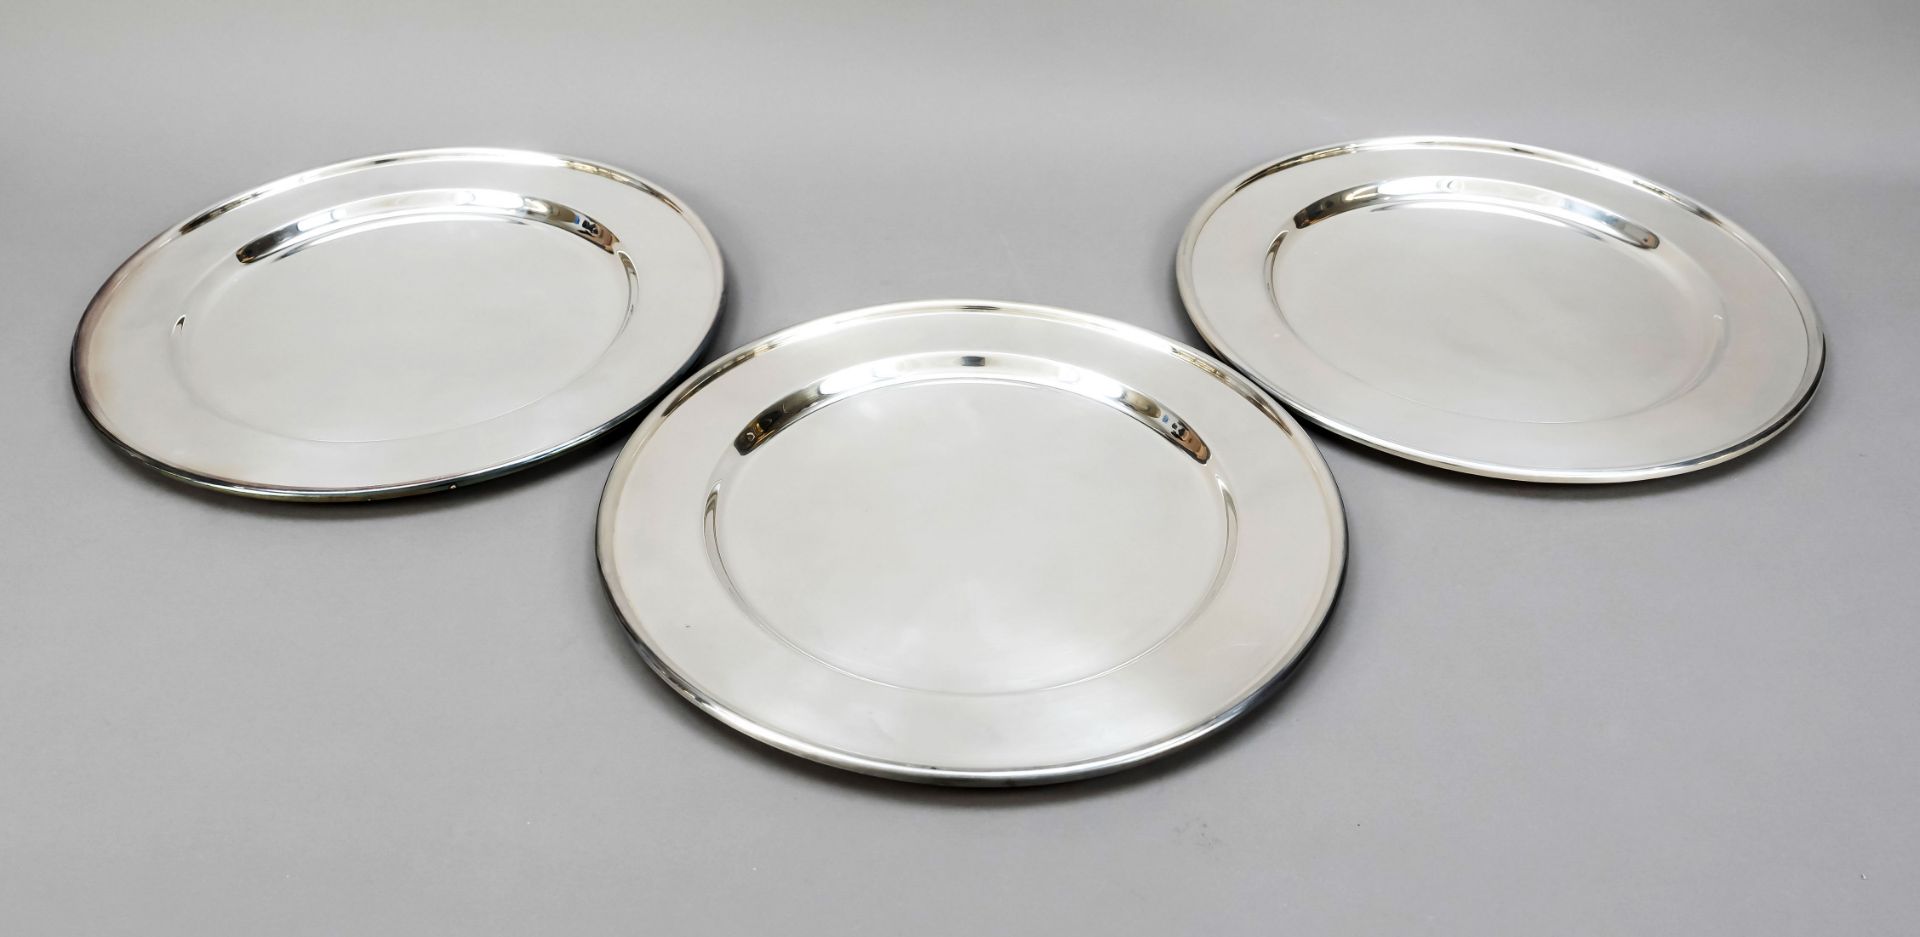 Five placemats, Italy, 20th century, sterling silver 925/000, smooth, slightly moulded shape, Ø 31